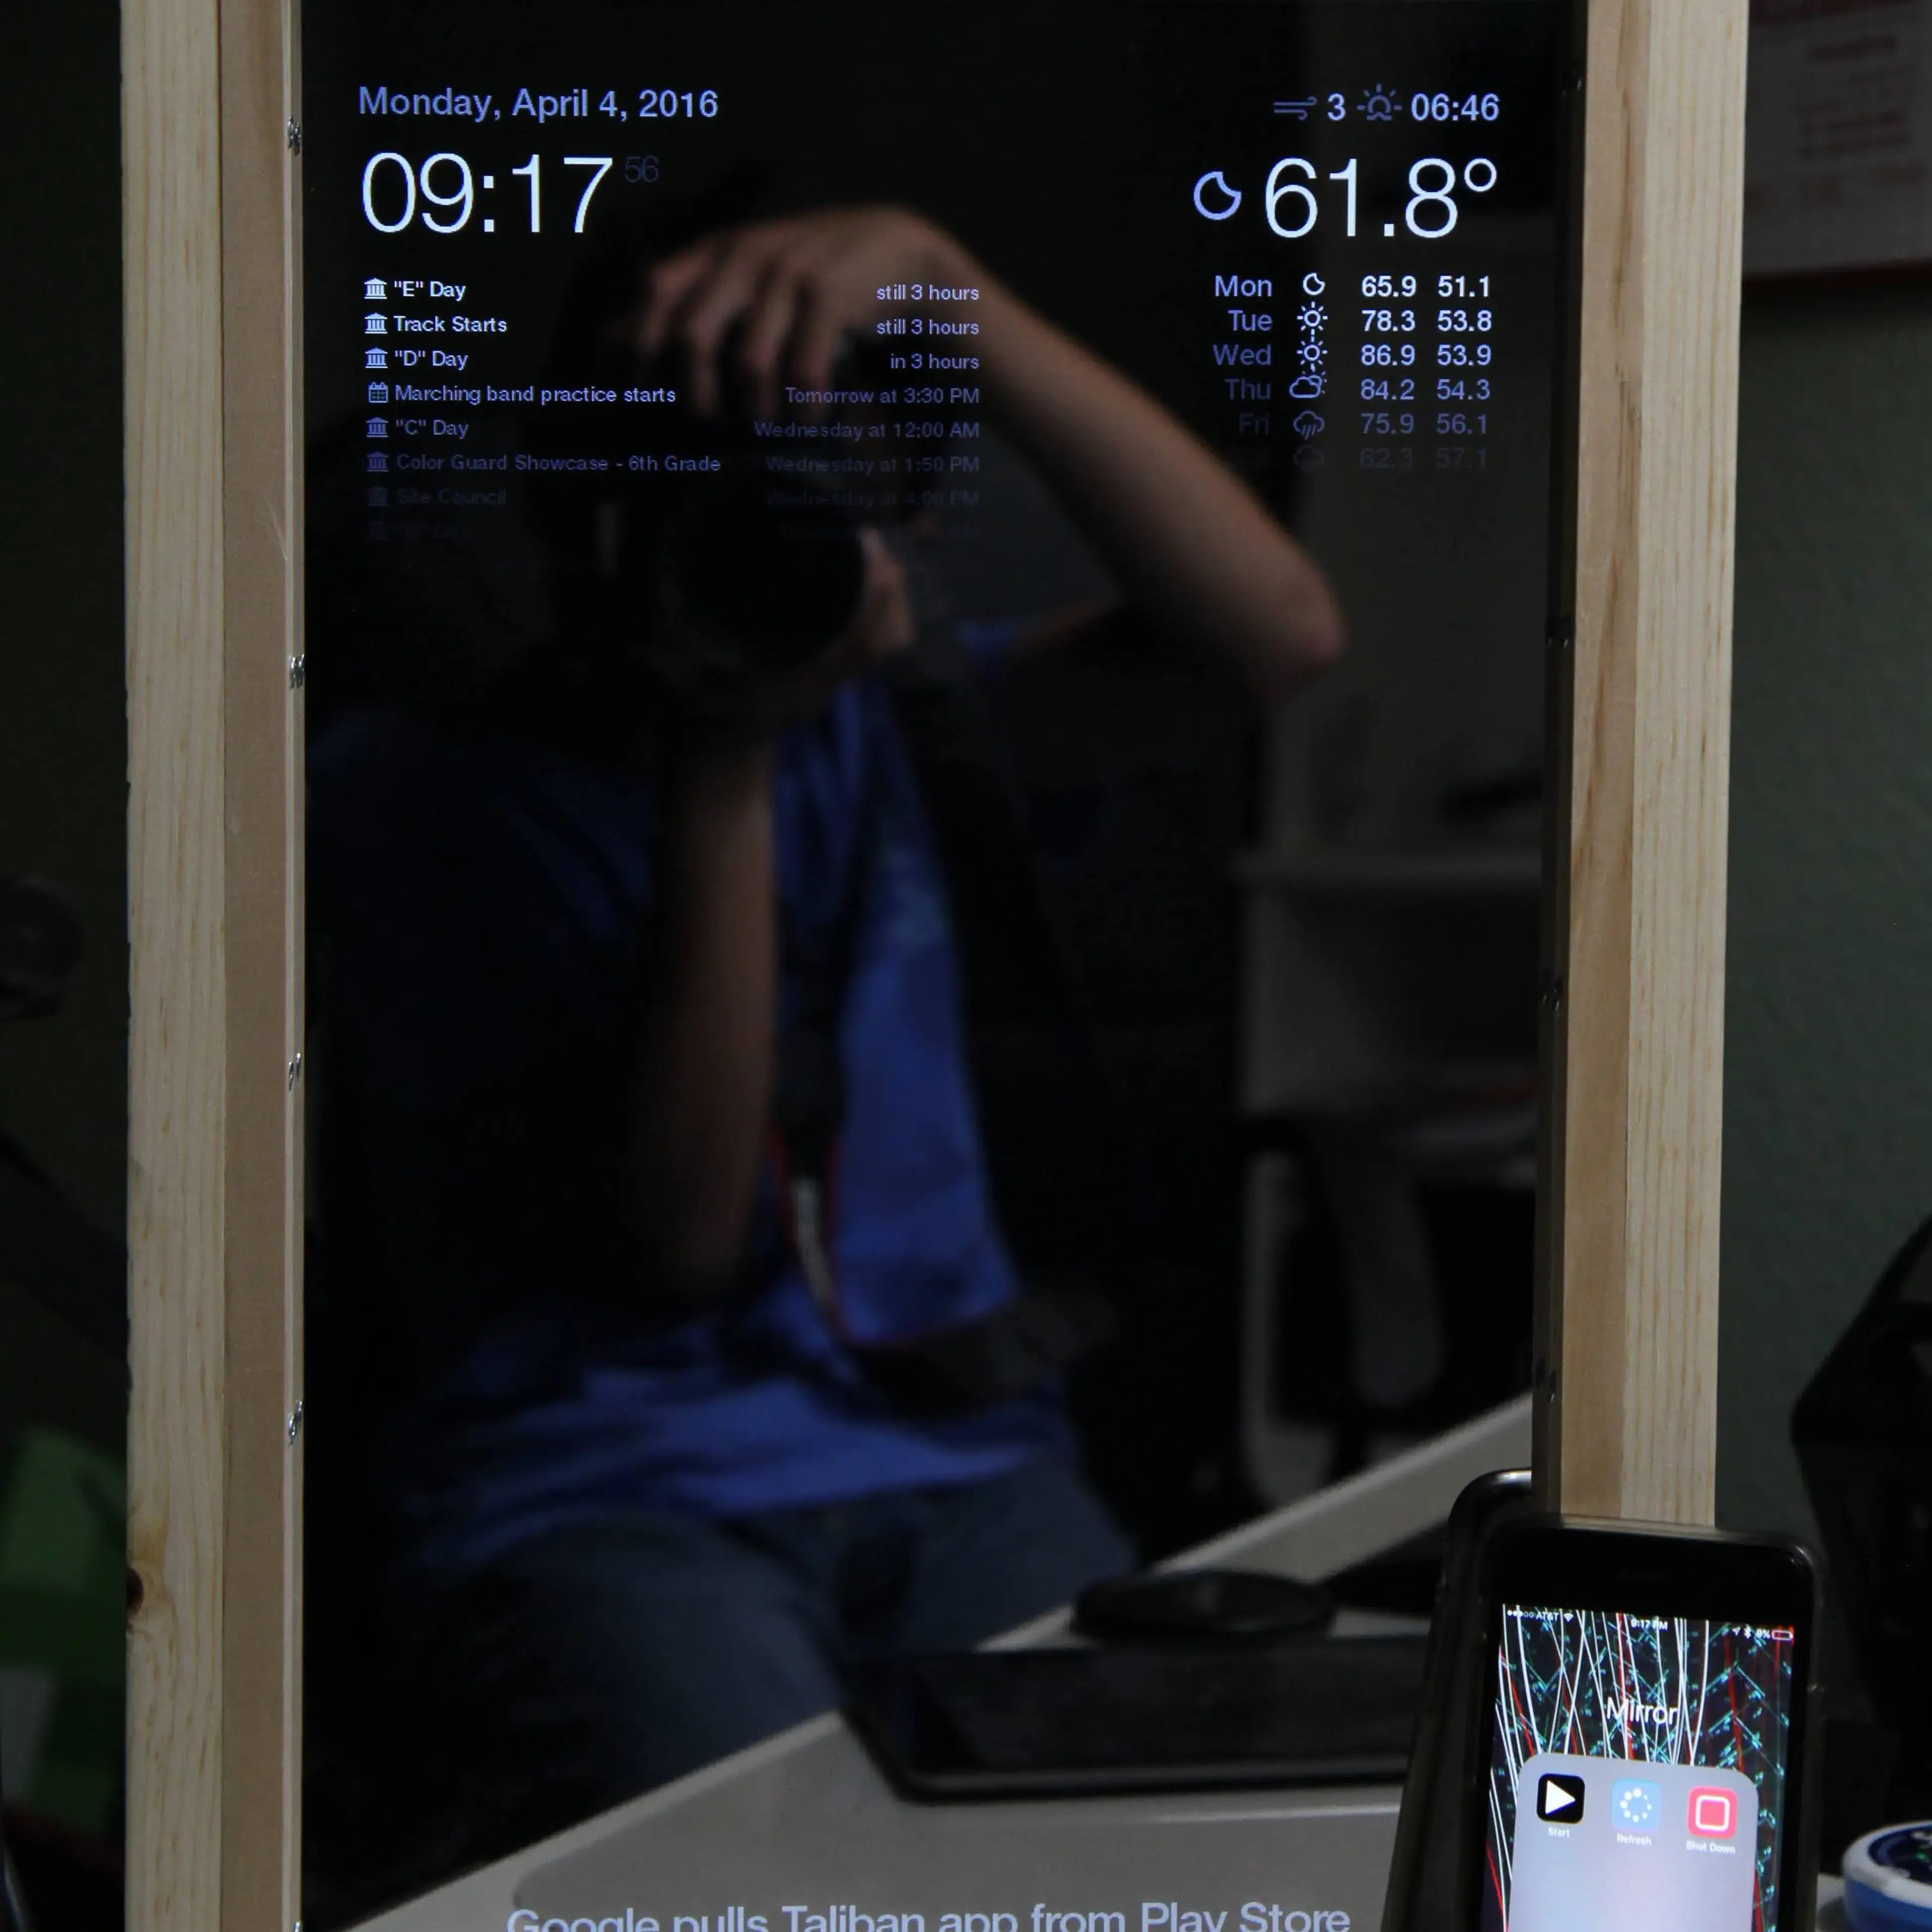 A shot of the front of the Magic Mirror. In the mirror's reflection, Kyle is seen holding his DSLR camera to take a picture of the Magic Mirror. The Mirror magically shows information 'through' the mirror: on the top, the time, date, weather, weekly forecast, calendar events are shown. News headlines are shown at the bottom of the mirror. Alongside the mirror is an iPhone 5. The iPhone shows a folder on the home screen, with the folder's name being 'Mirror'. The folder contains three shortcuts: 'Start', 'Restart', and 'Shut Down'. The start button icon is a white play icon on a black background. The restart button icon is a white circular pattern on a blue background. The shut down icon is a white, hollow square on a red background.